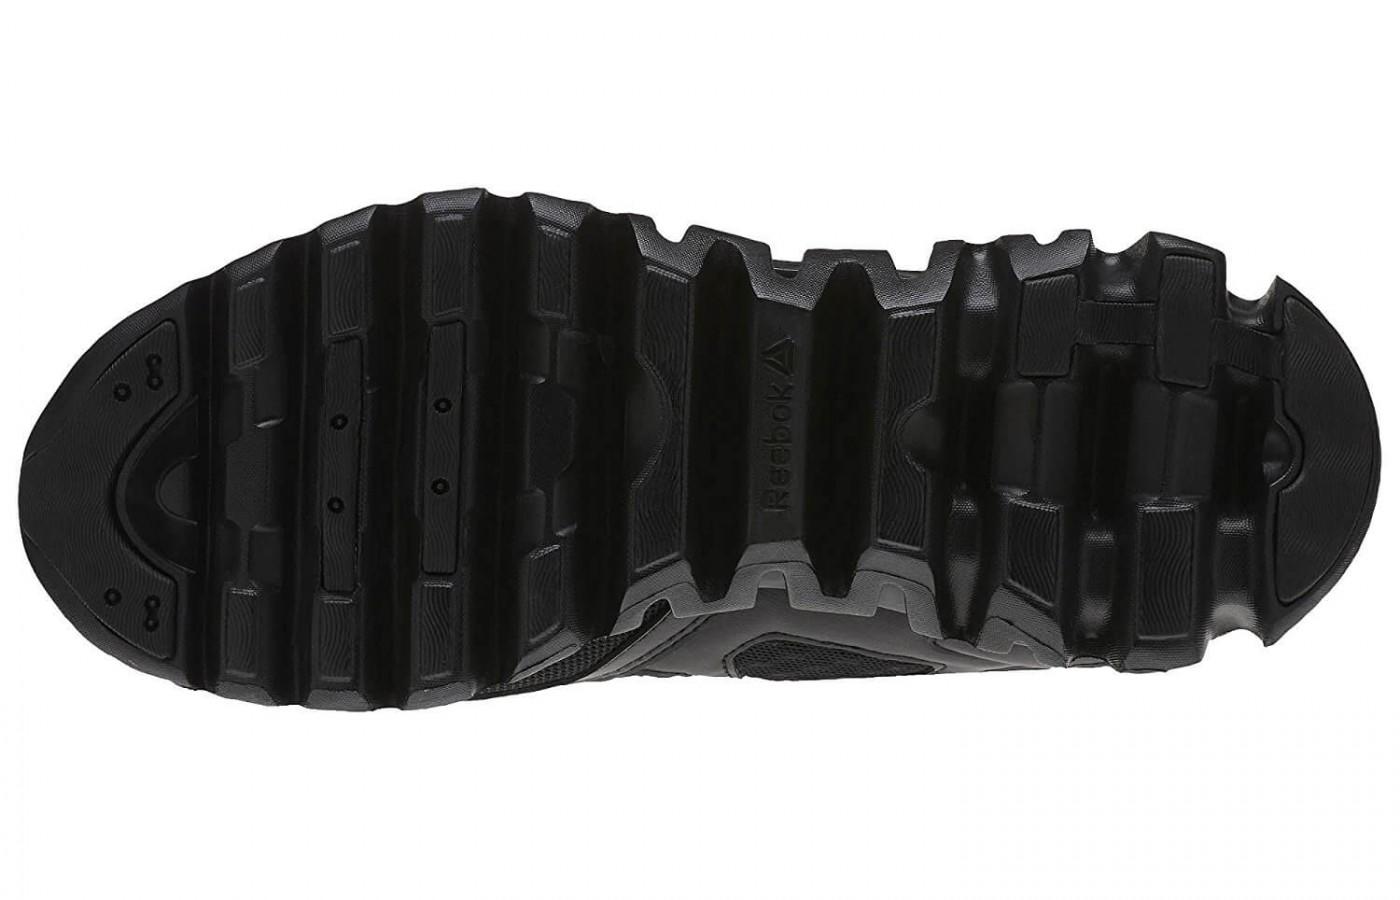 The outsold features a durable material with added traction 